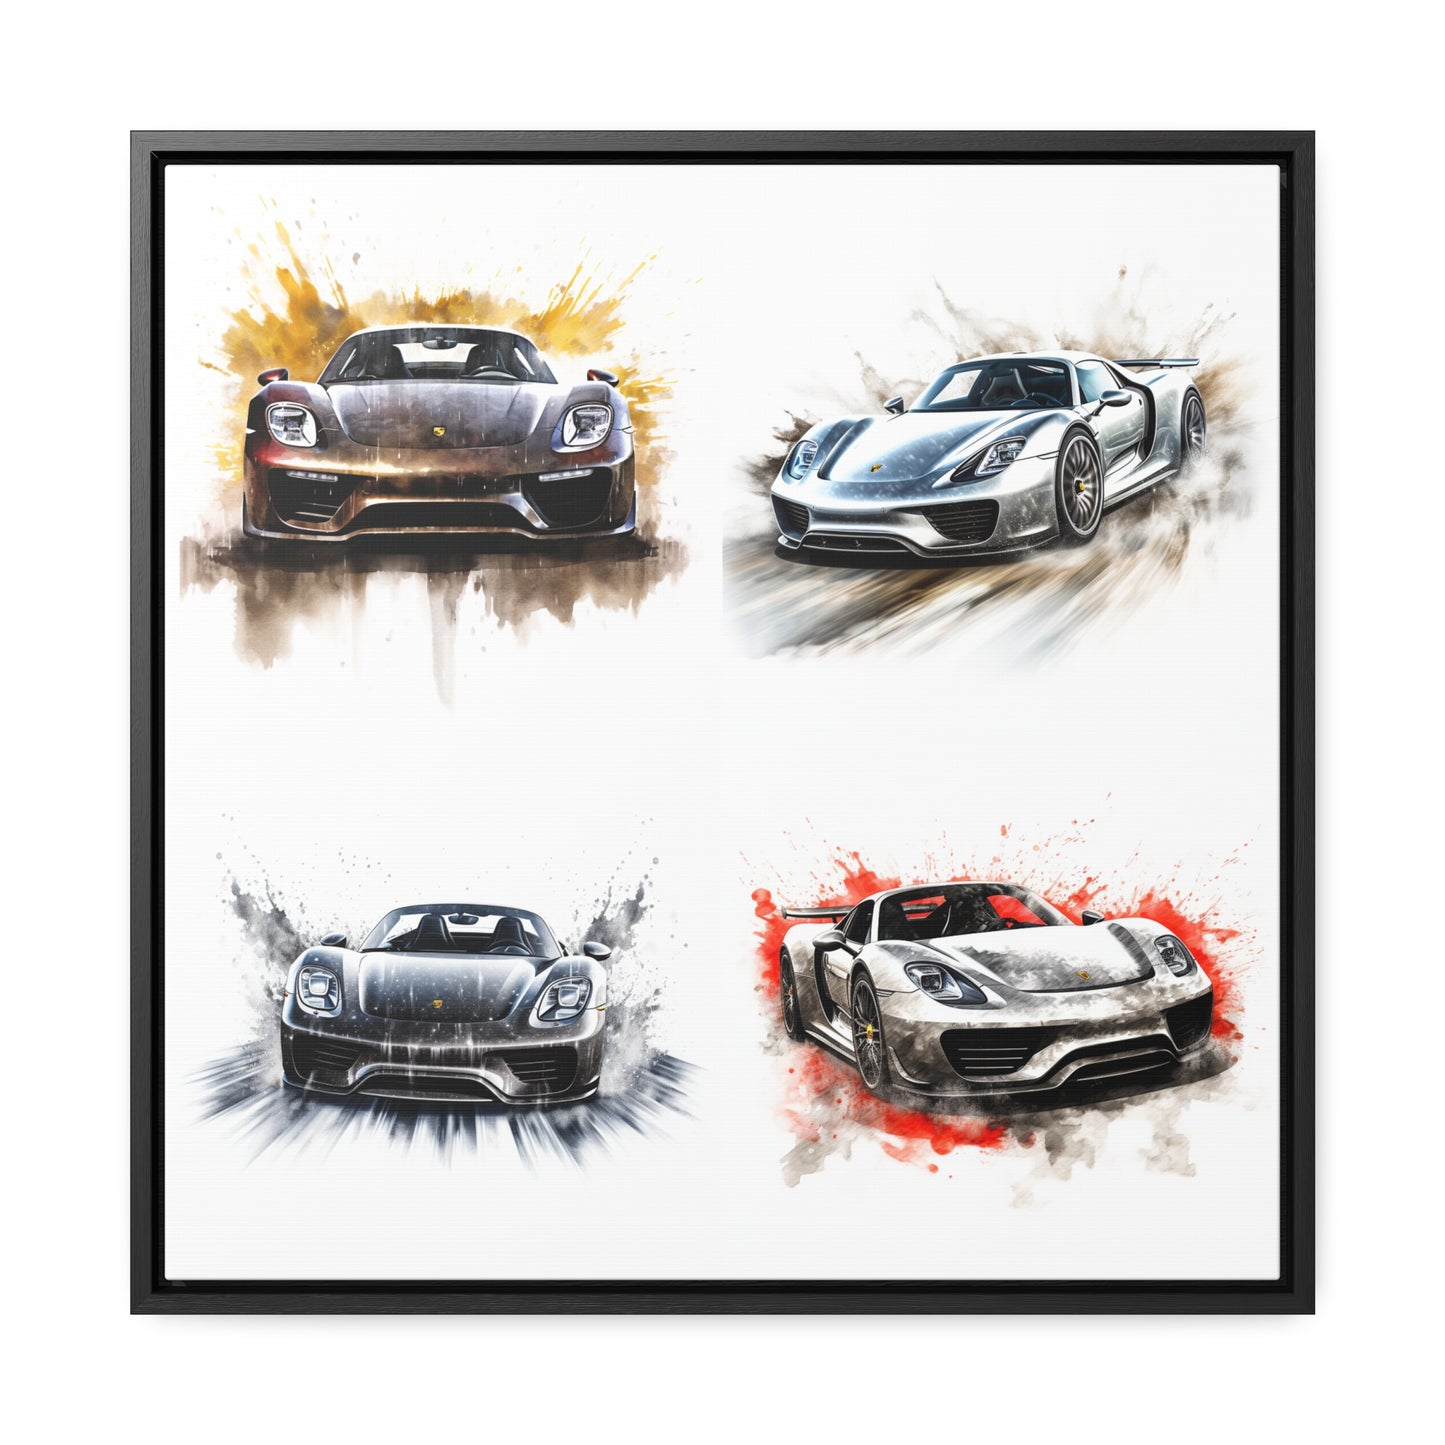 Gallery Canvas Wraps, Square Frame 918 Spyder white background driving fast with water splashing 5